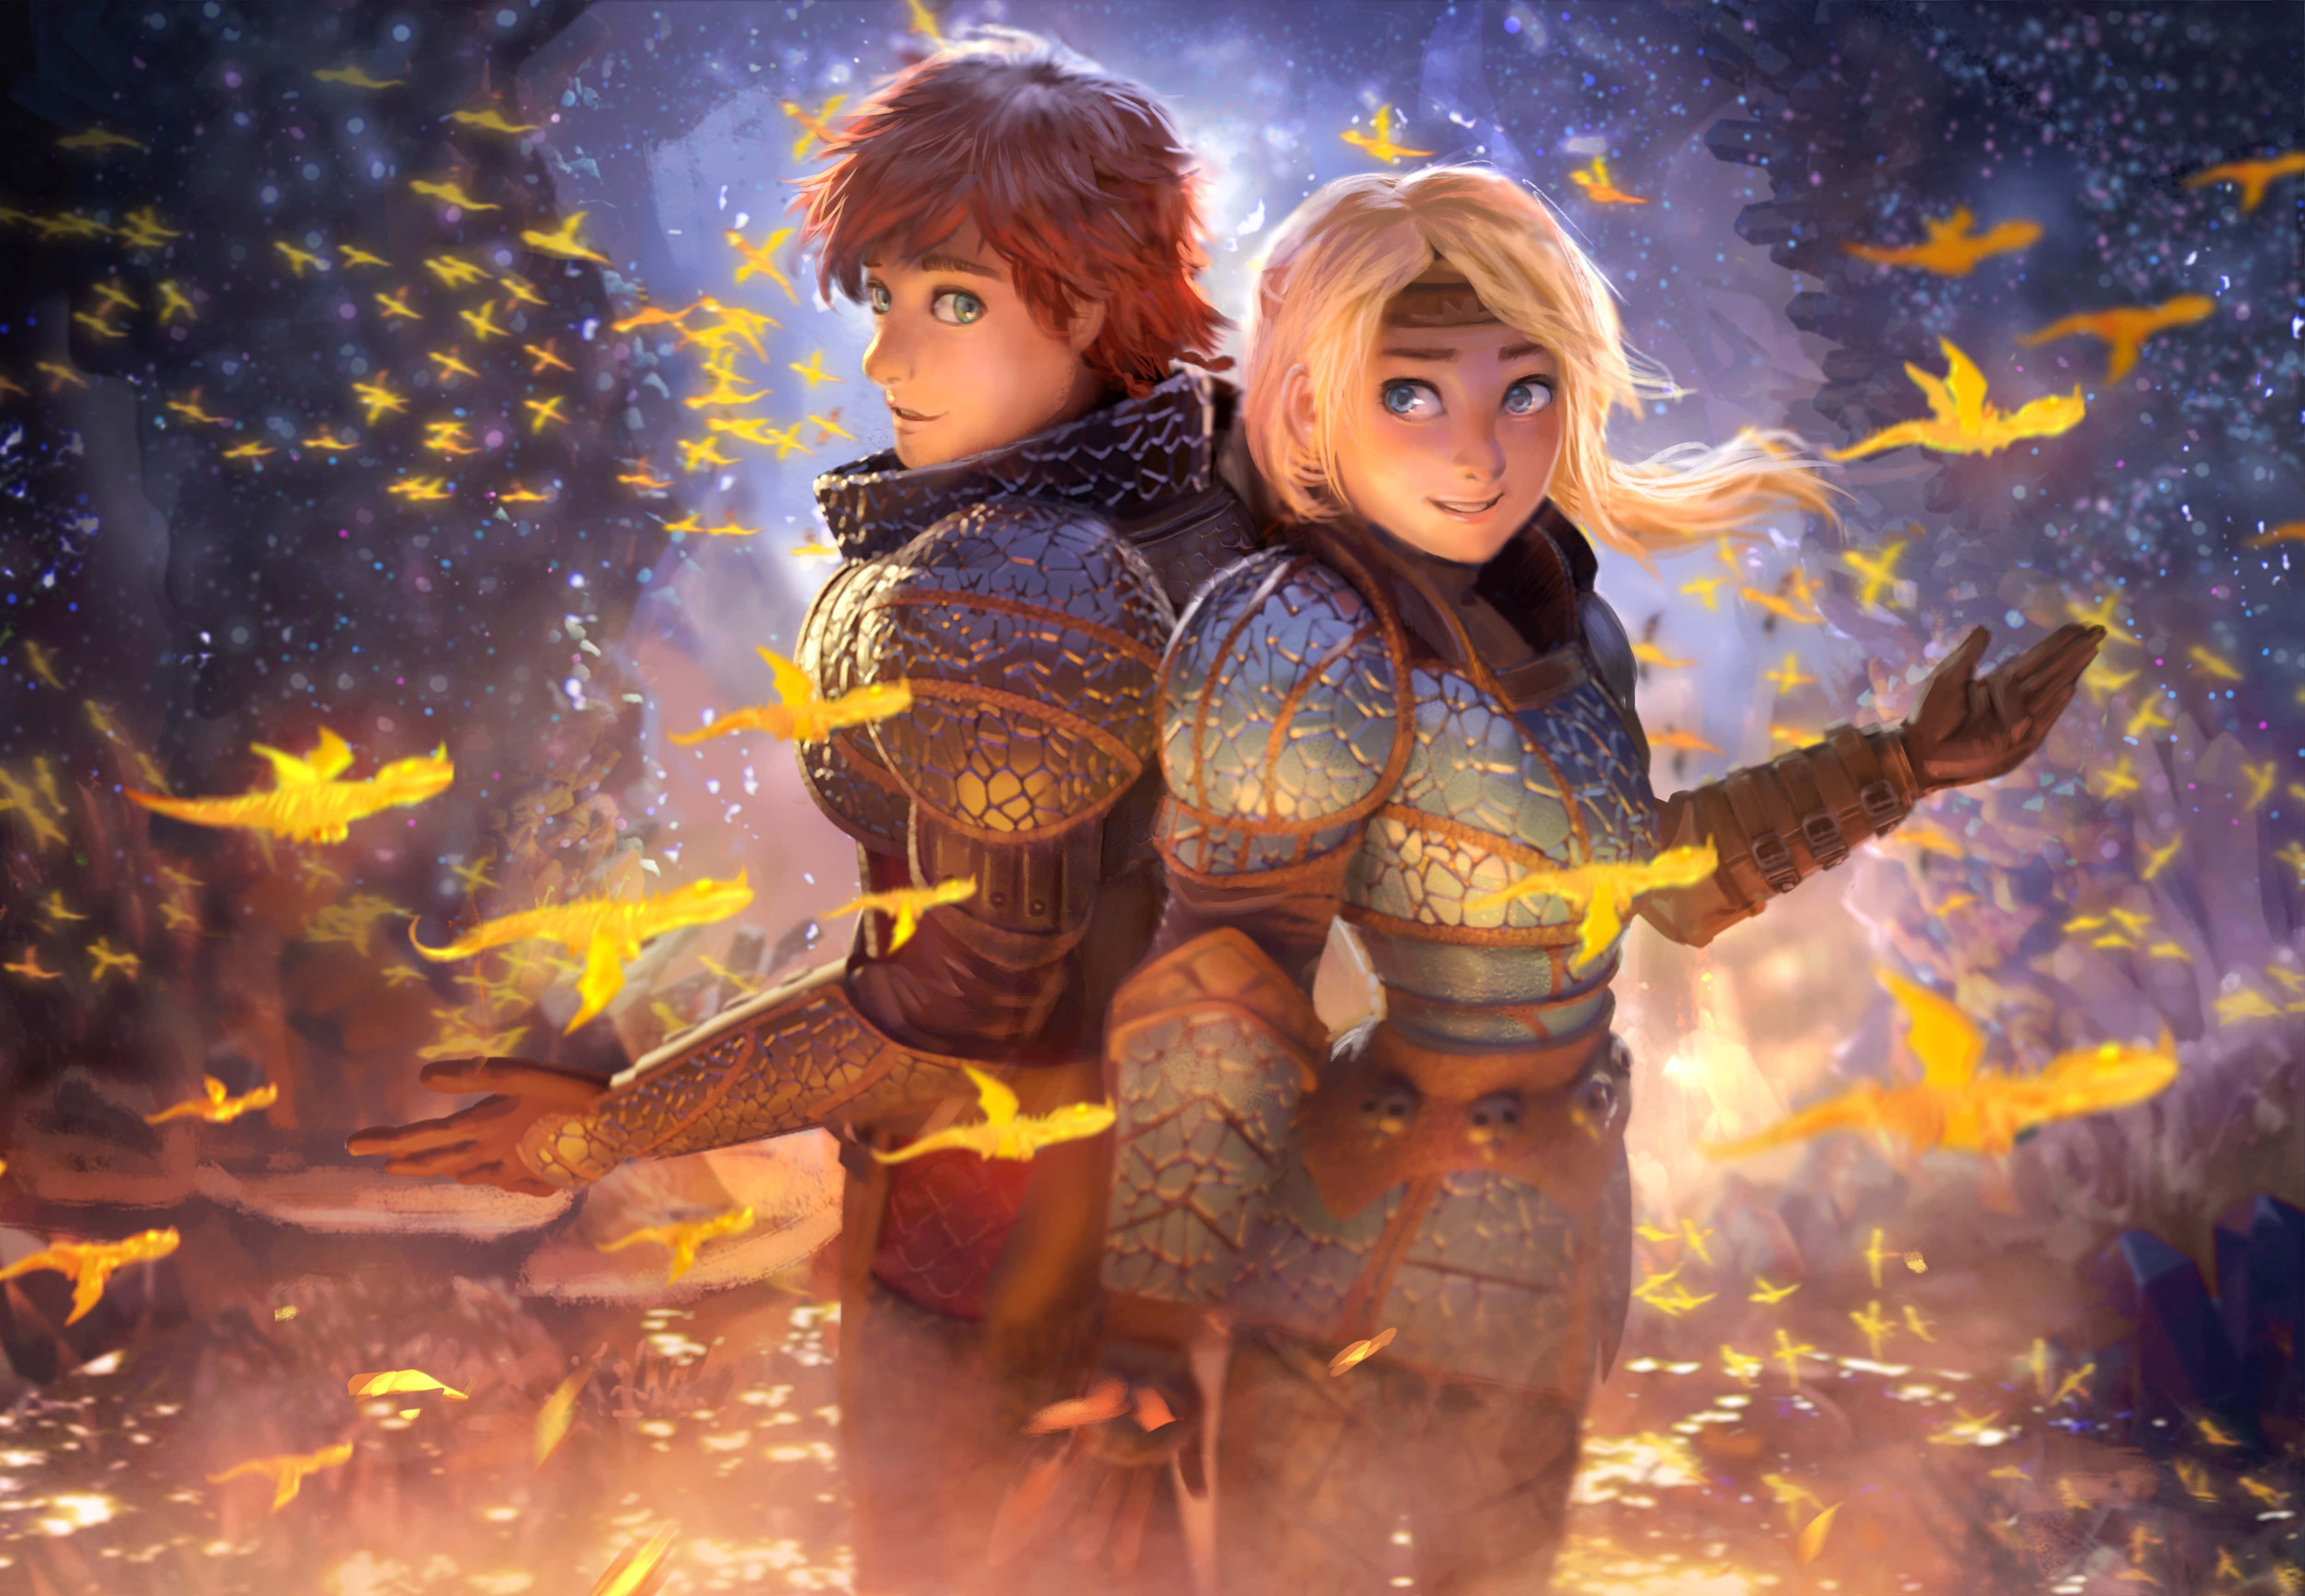 Join Hiccup and Toothless in the amazing adventure of 'How To Train Your Dragon' in 4K Wallpaper